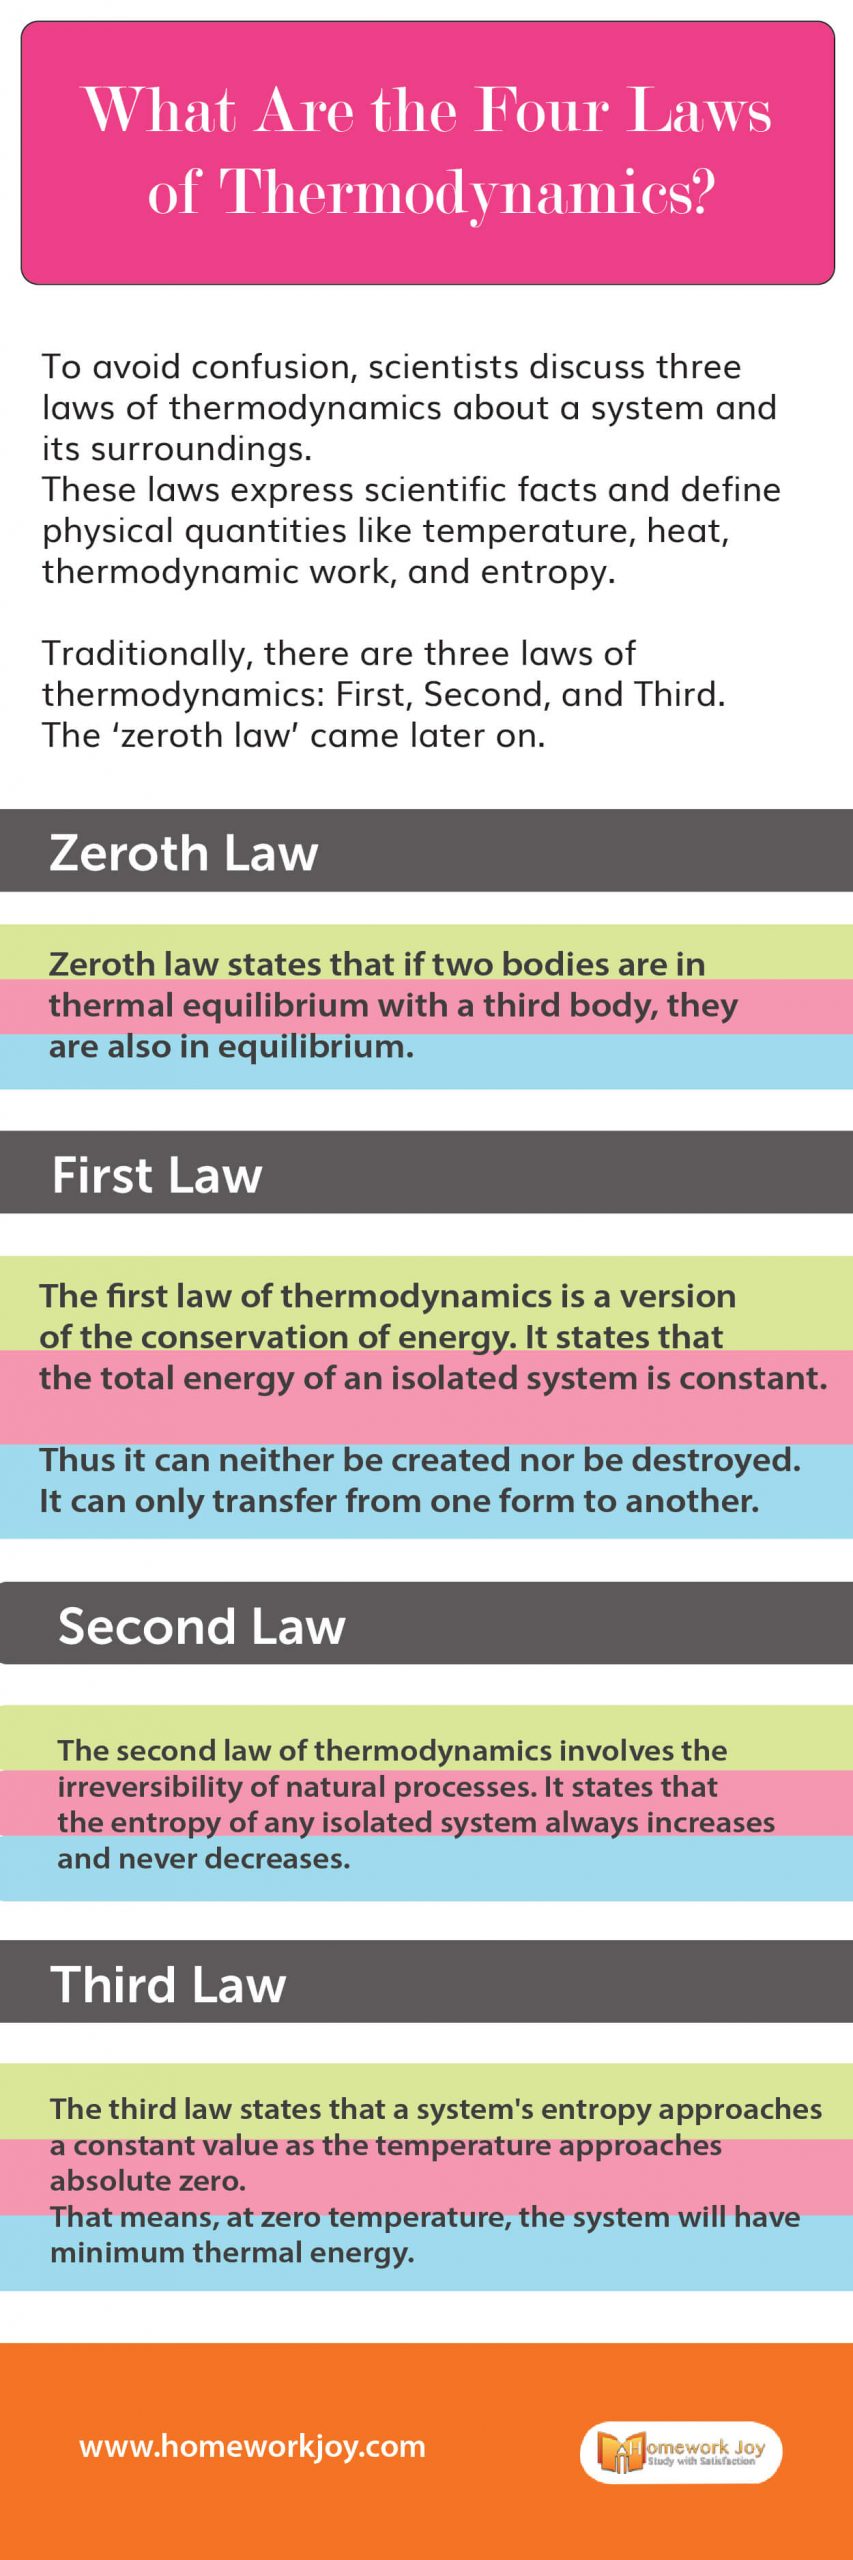 What Are the Four Laws of Thermodynamics-01